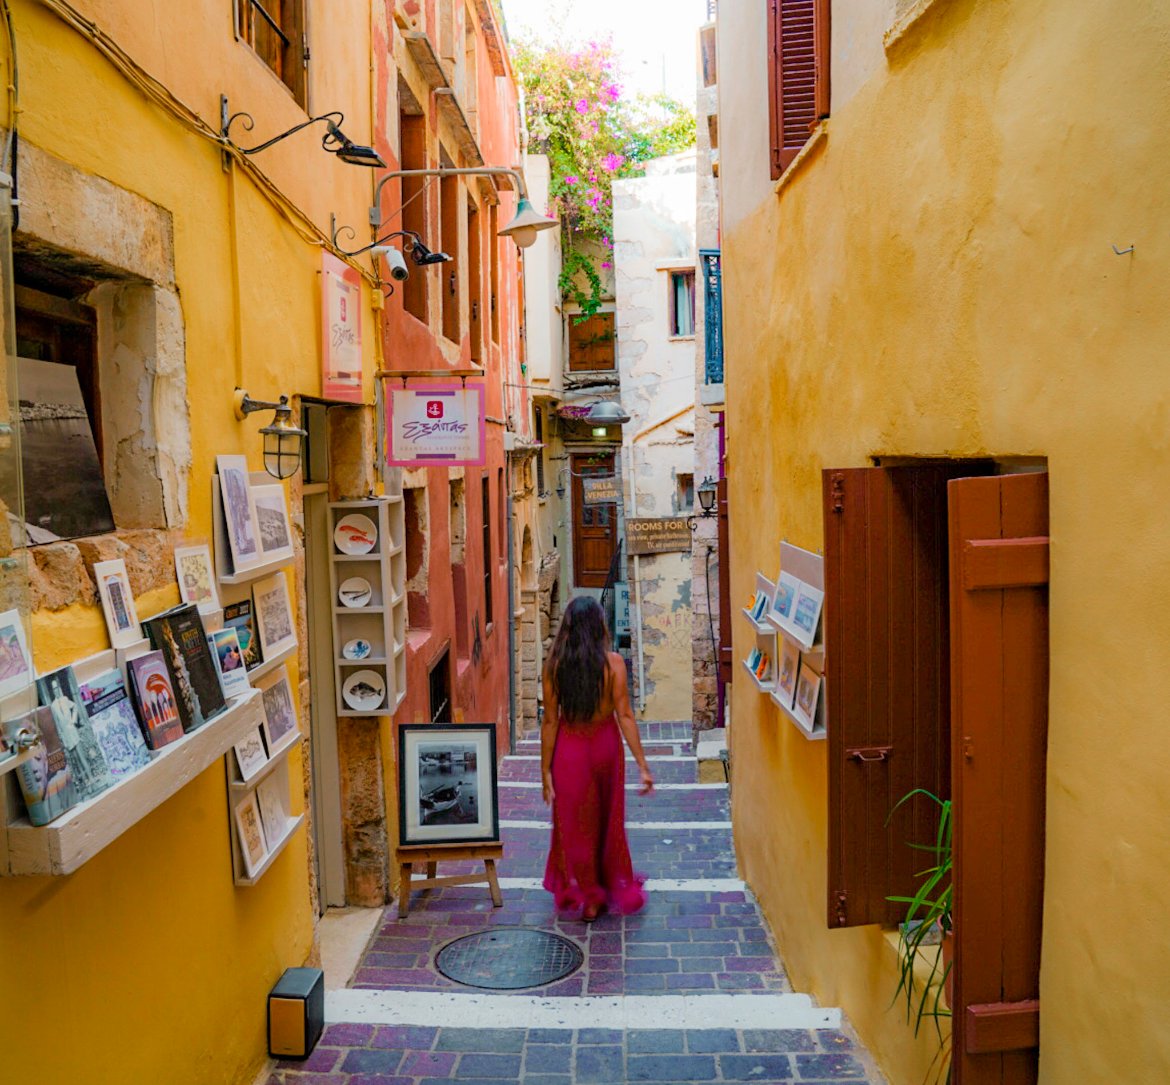 The old town of Chania, things to do in Chania